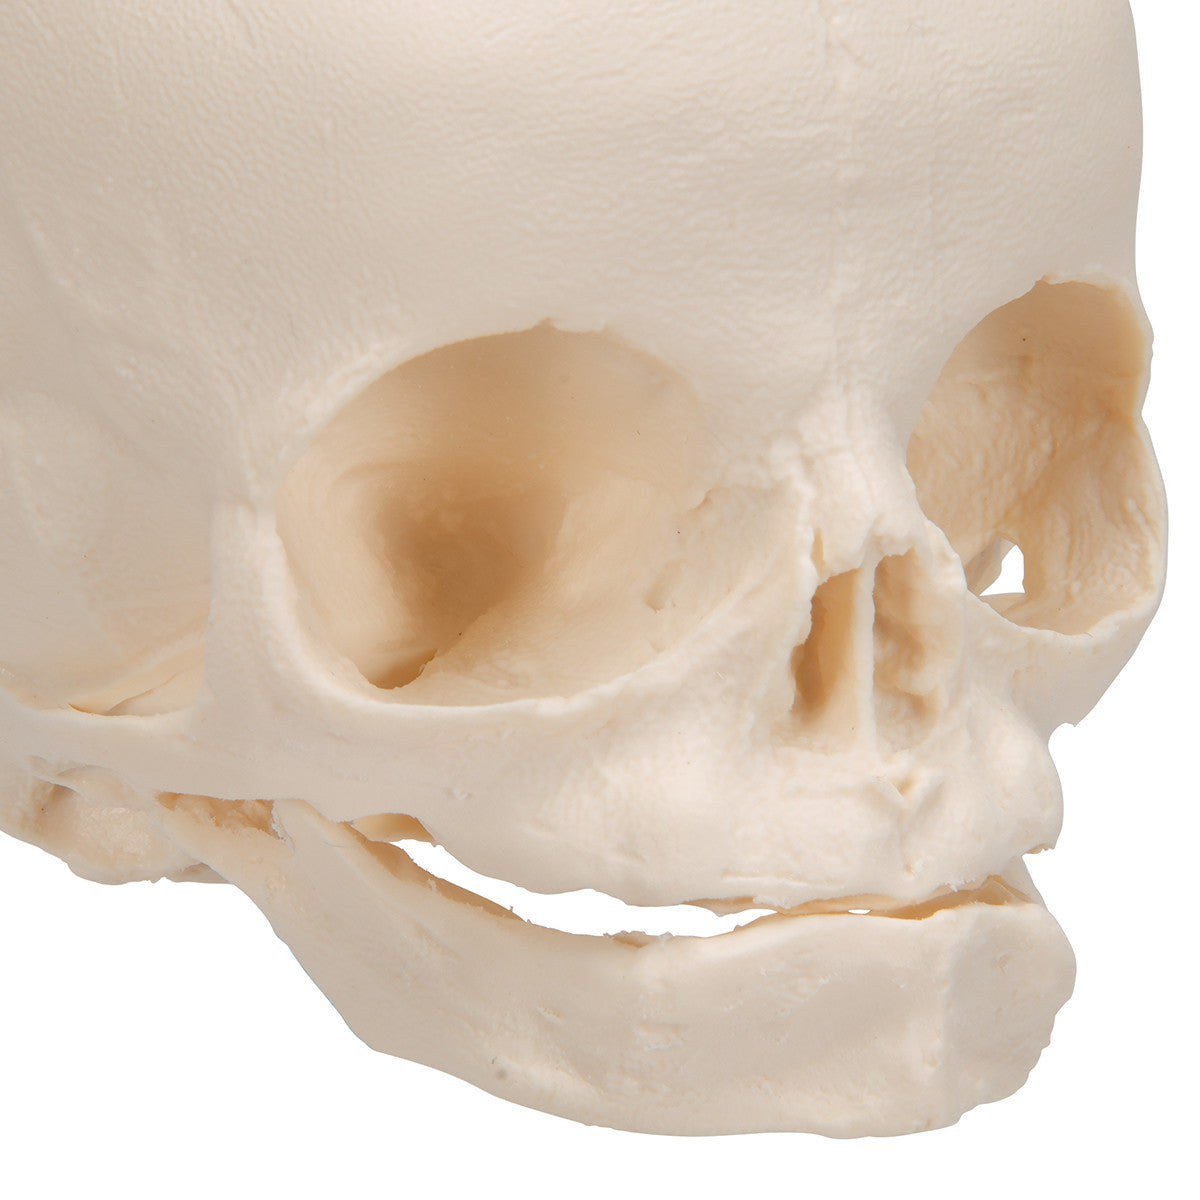 Fetal Skull with Stand | 3B Scientific A26